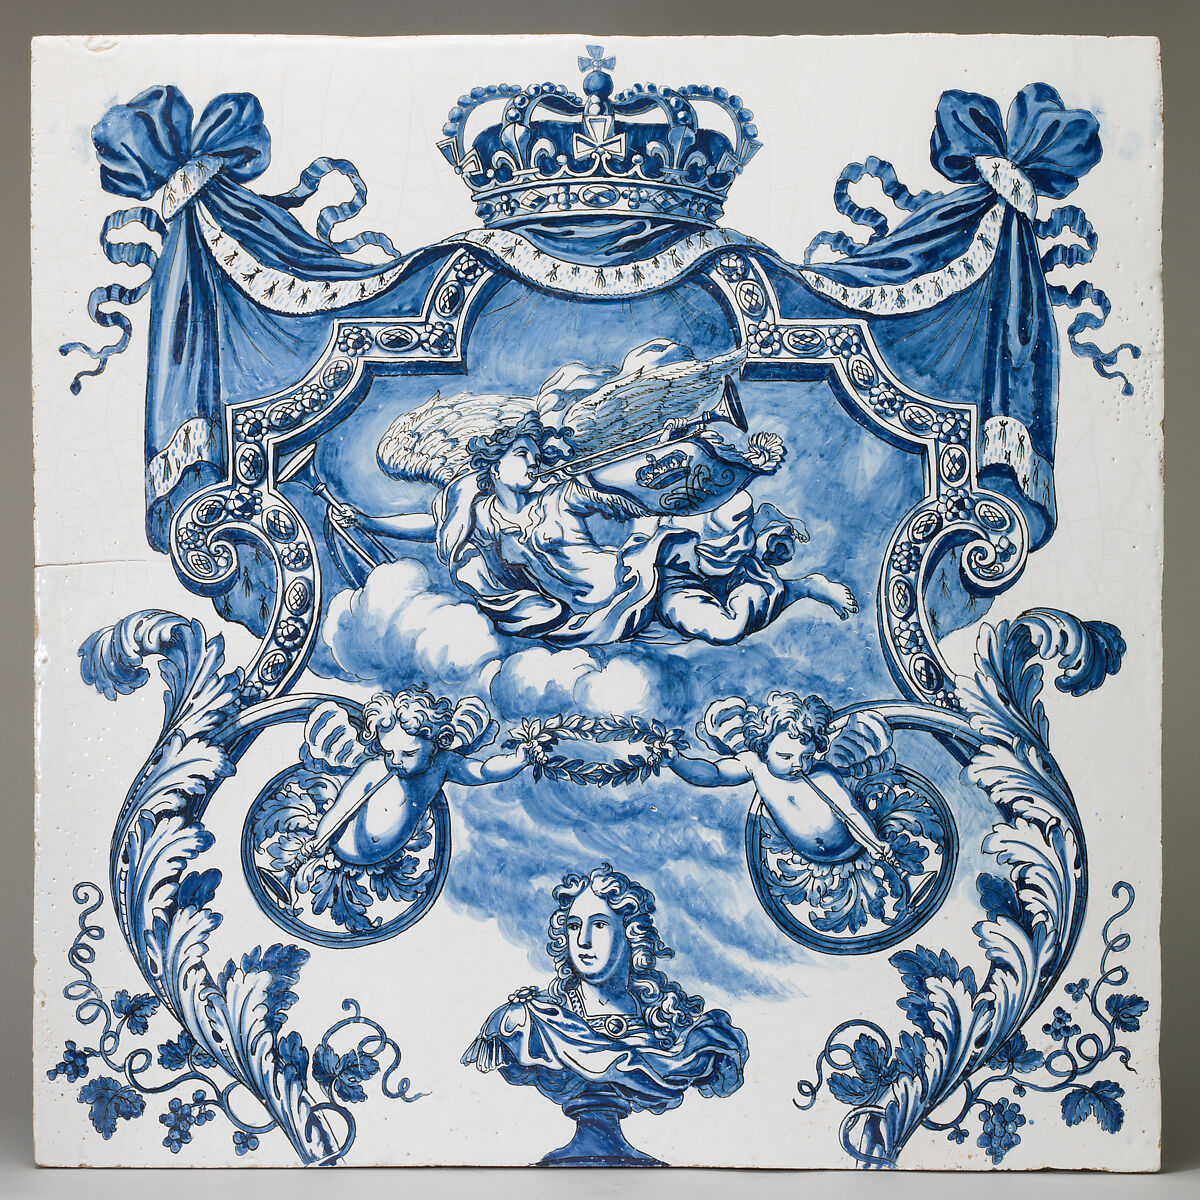 Tile with a bust of William III (1650–1702), Adrianus Kocx, Delftware (tin-glazed earthenware), Dutch, Delft